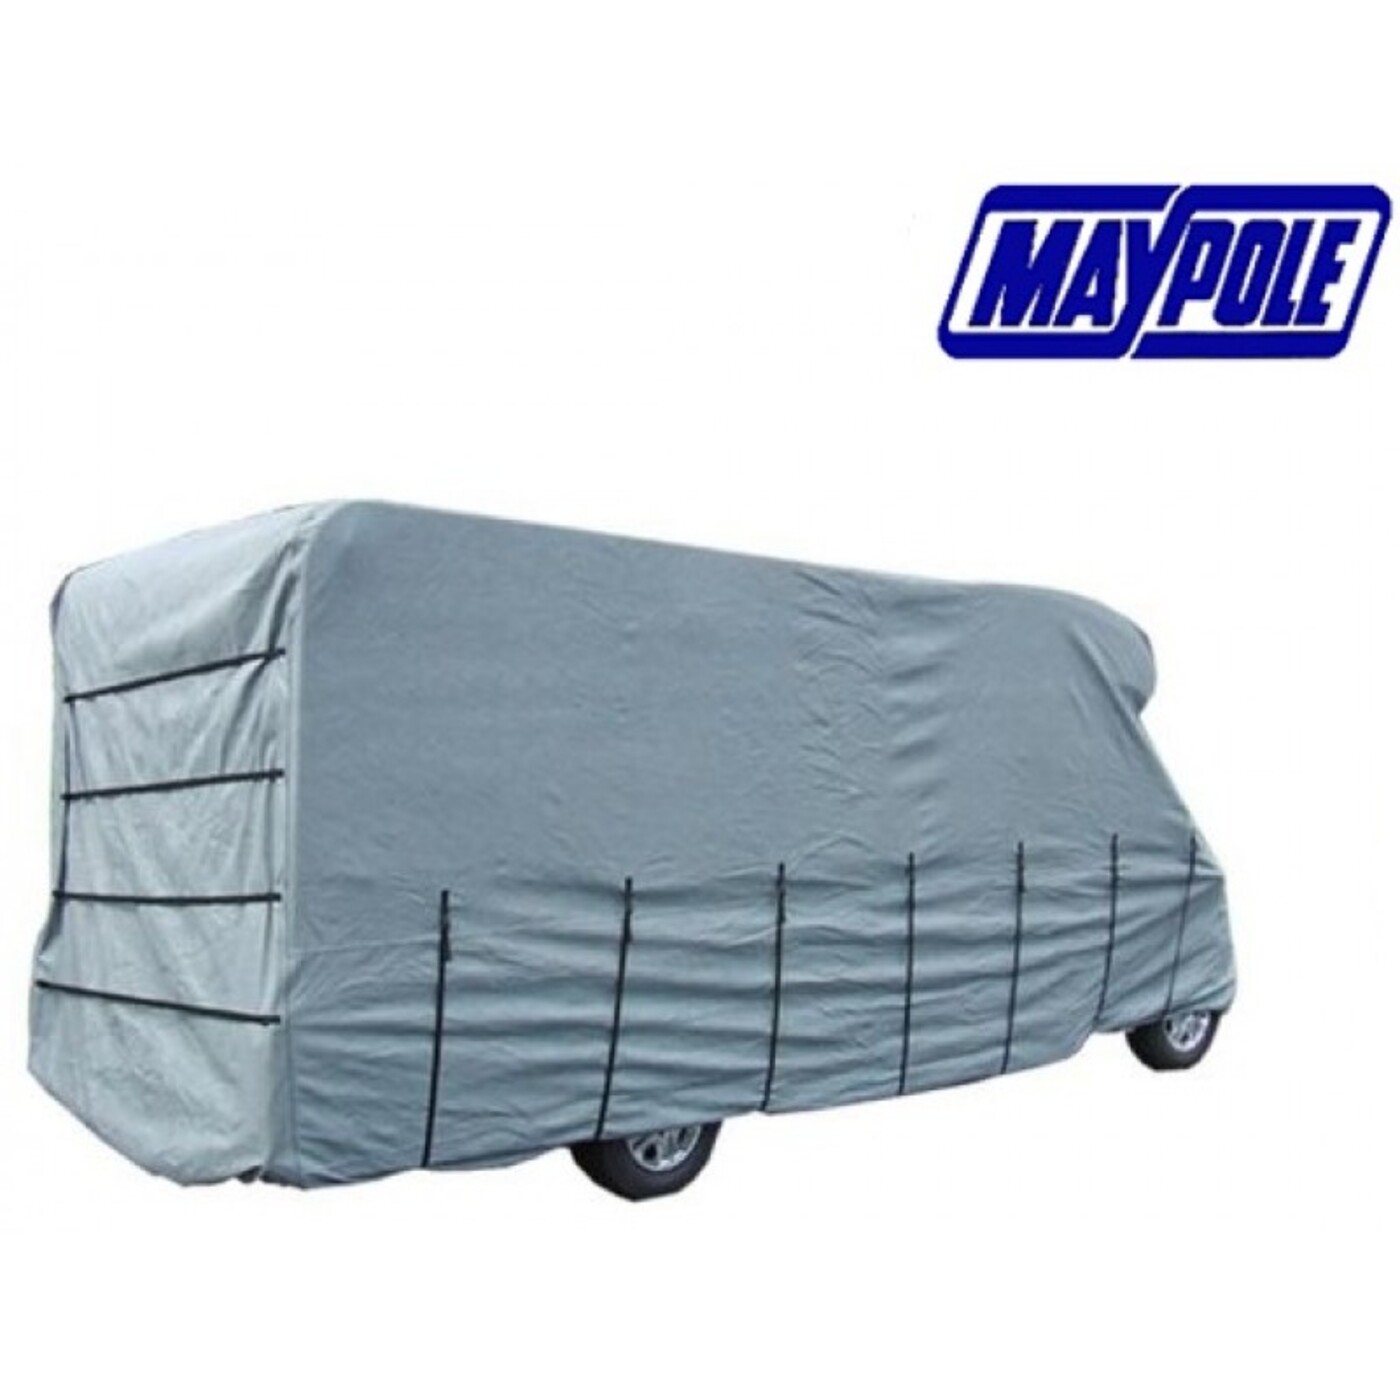 SUMEX Motorhome Cover Fits Breathable Water Resistant 6.5-7 m 